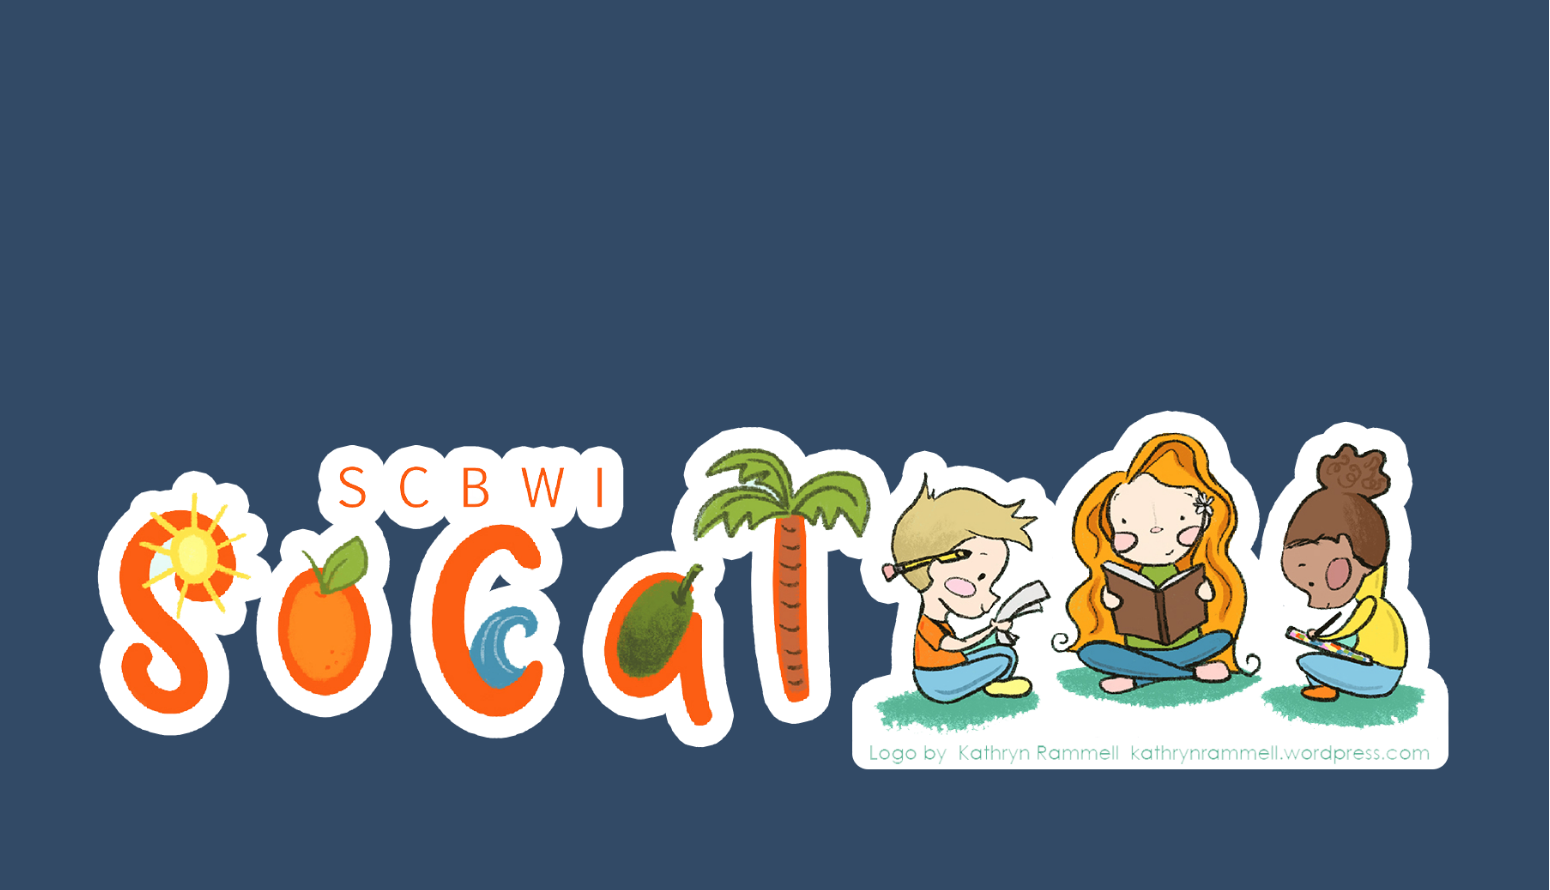 scbwi_Socal_logo on navy rectangle for right half of hero.png